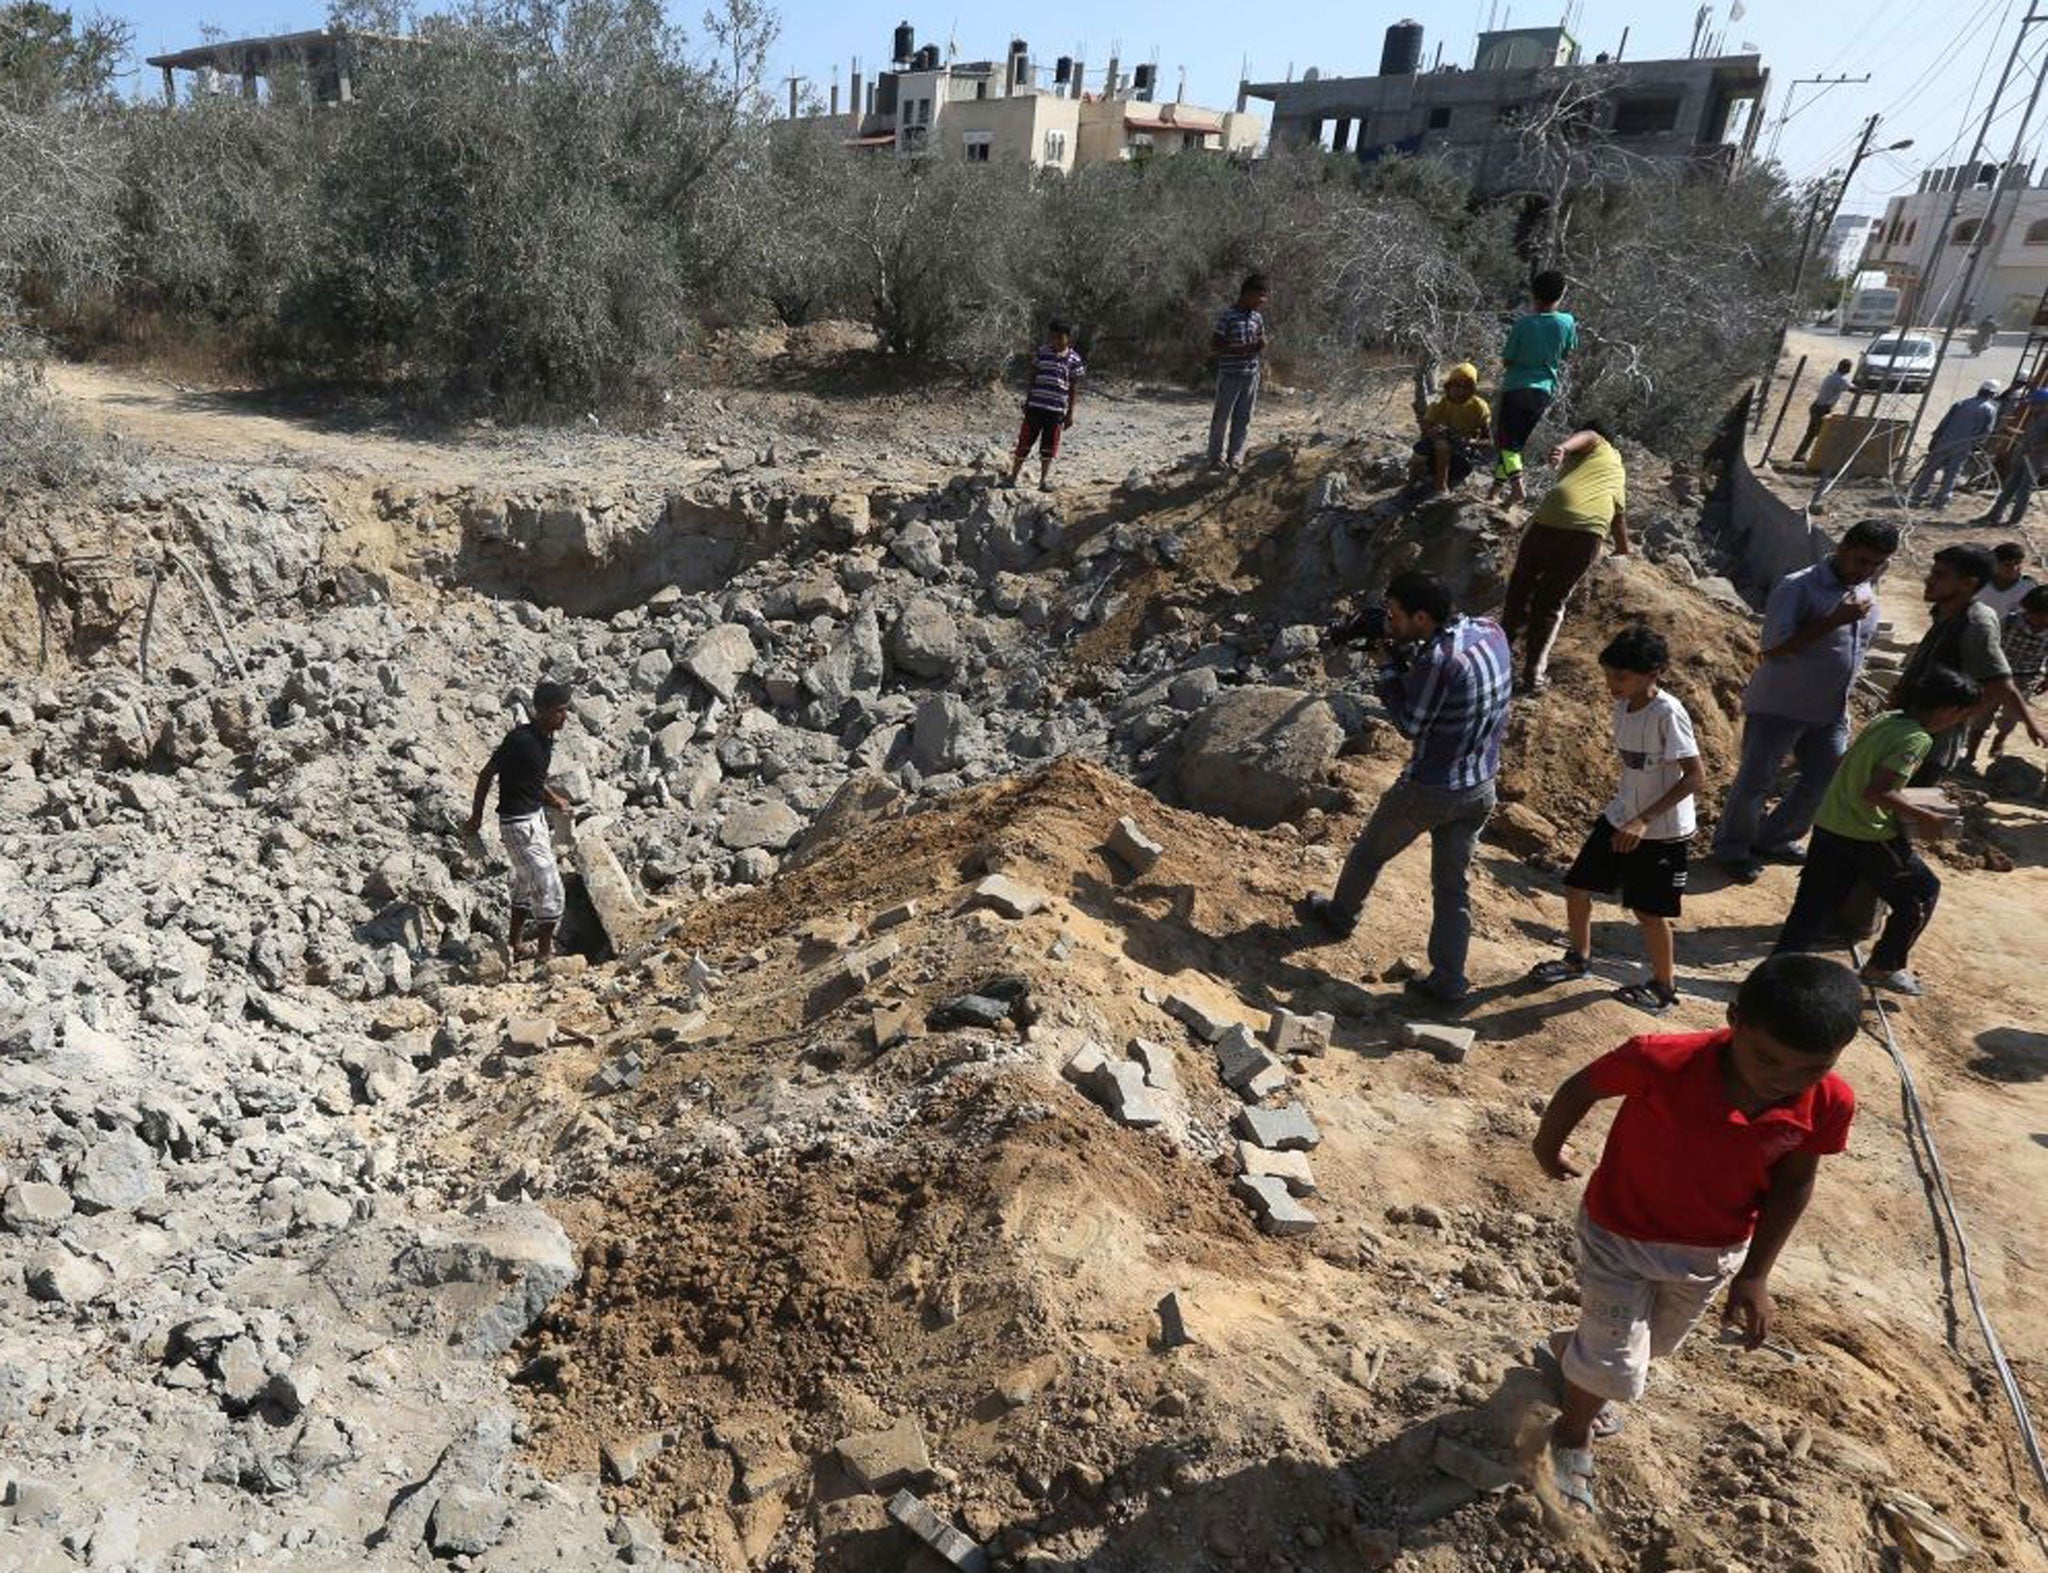 Gazans inspect the damage after the Israeli airstrike, which caused no reported fatalities